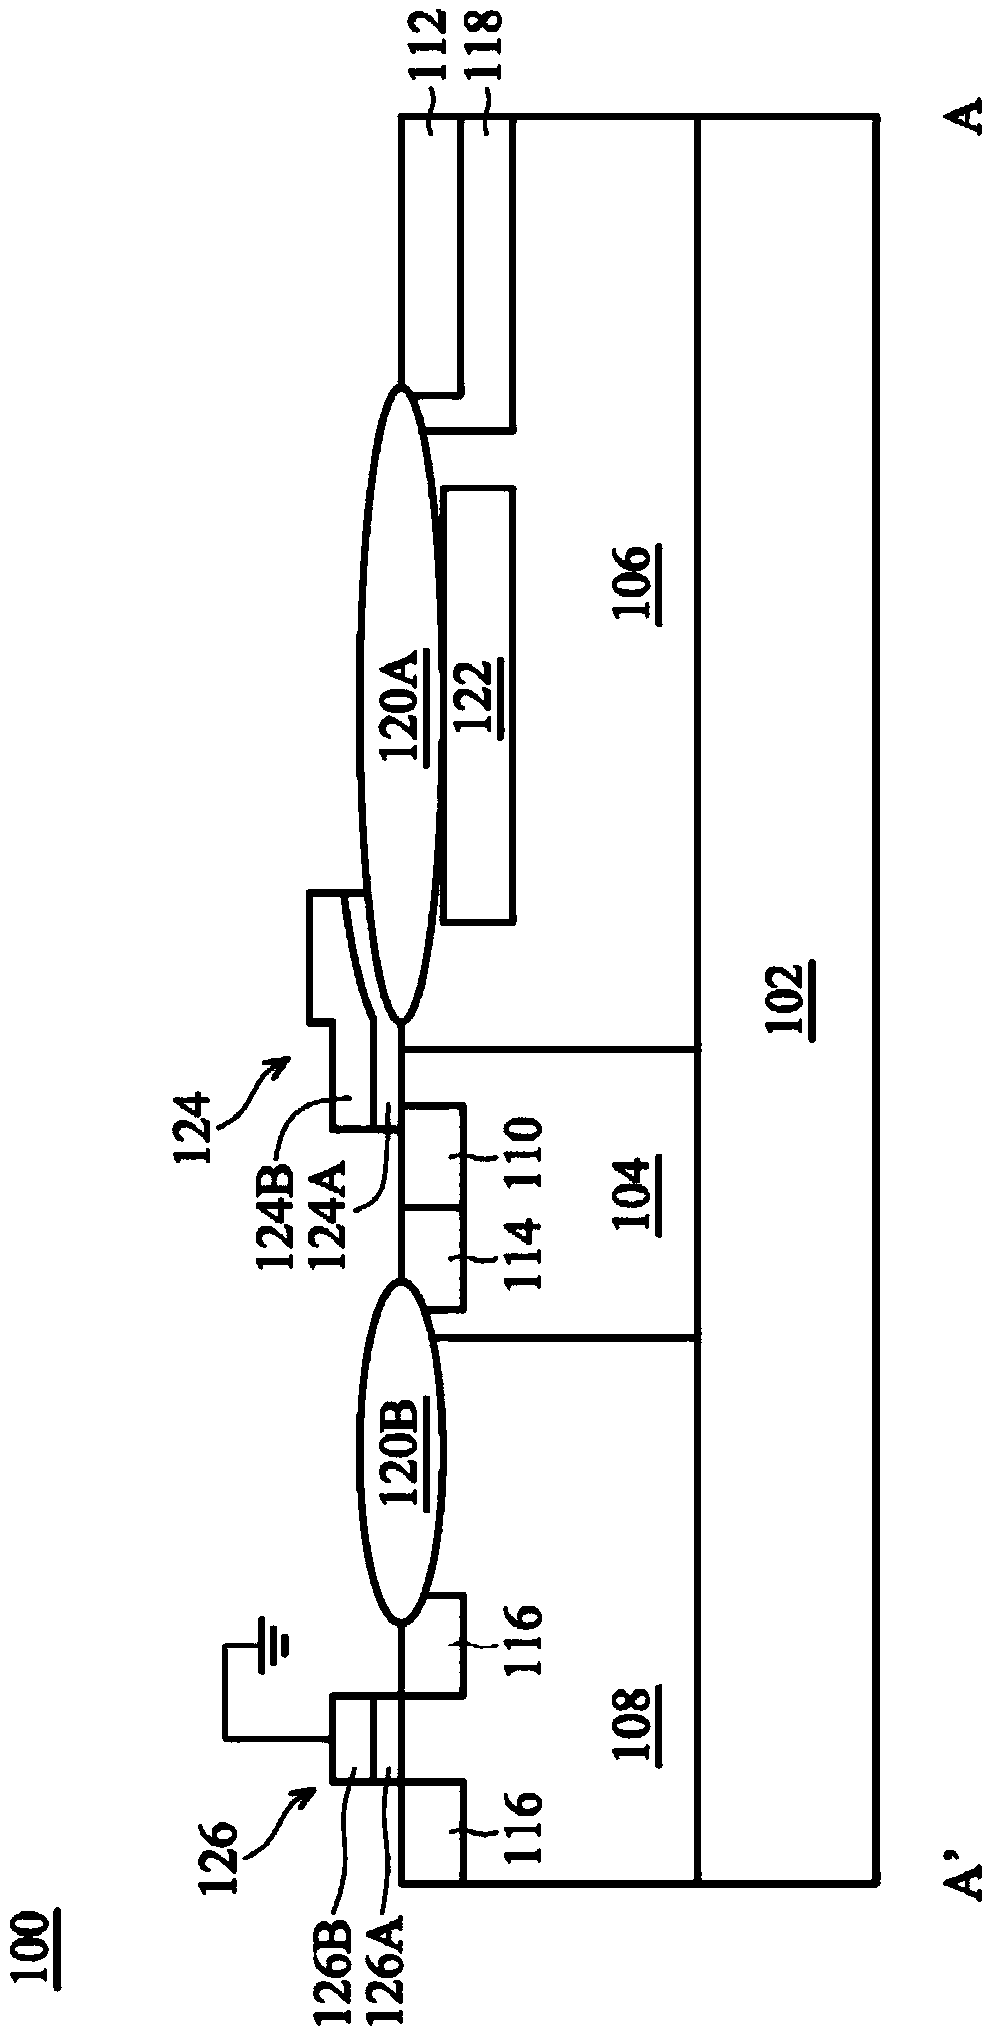 Laterally diffused metal oxide semiconductor field effect transistor